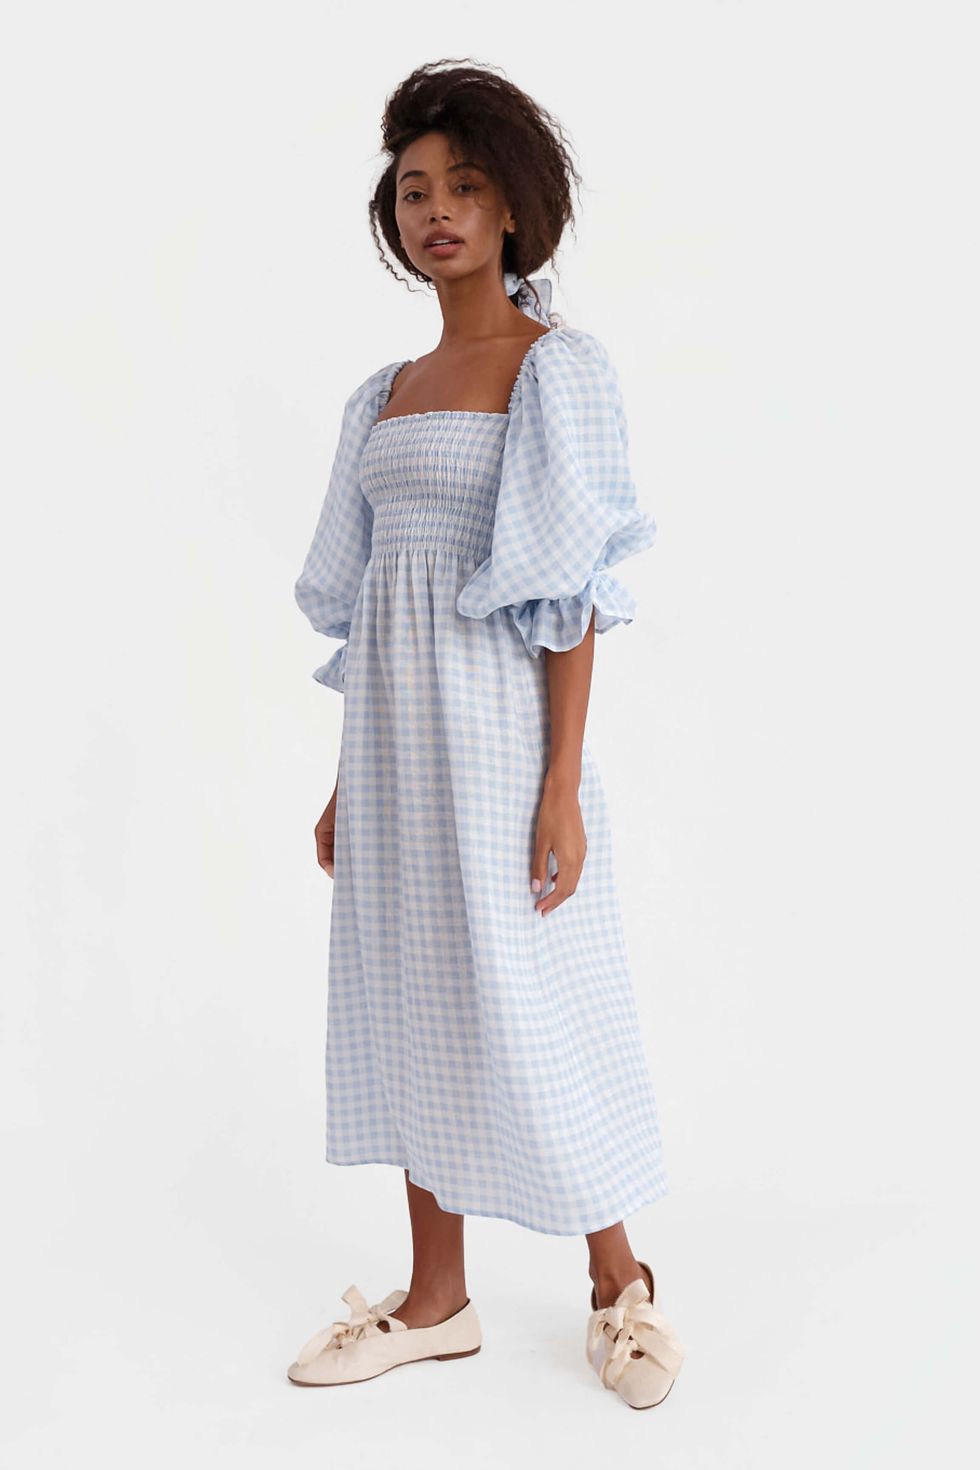 20 Best Dresses to Wear to a Baby Shower — Baby Shower Guest Dresses